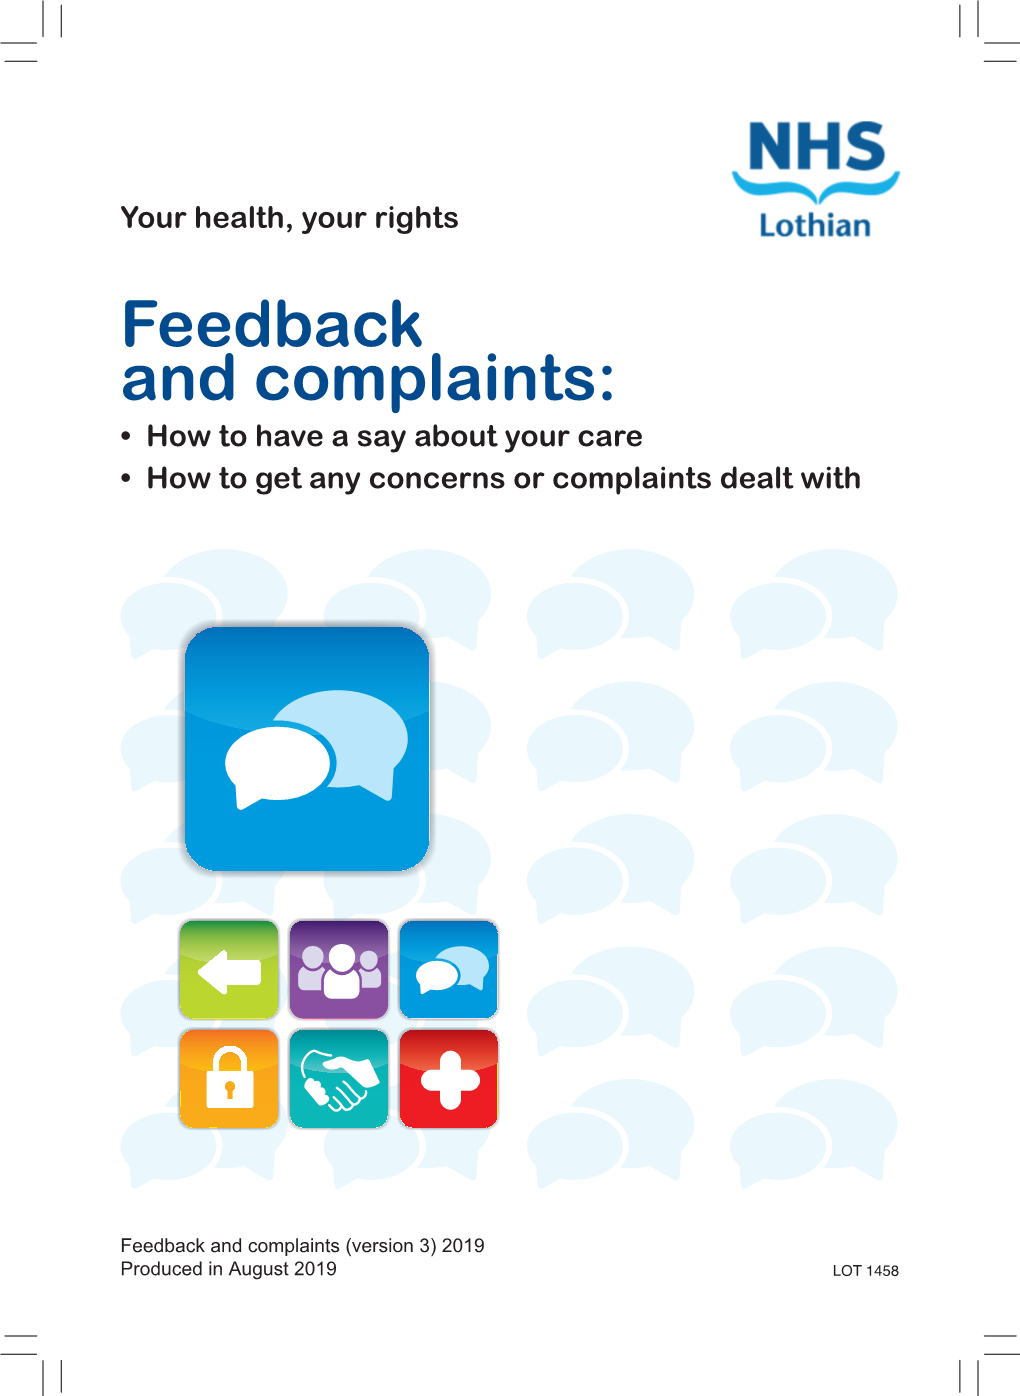 Feedback and Complaints: • How to Have a Say About Your Care • How to Get Any Concerns Or Complaints Dealt With